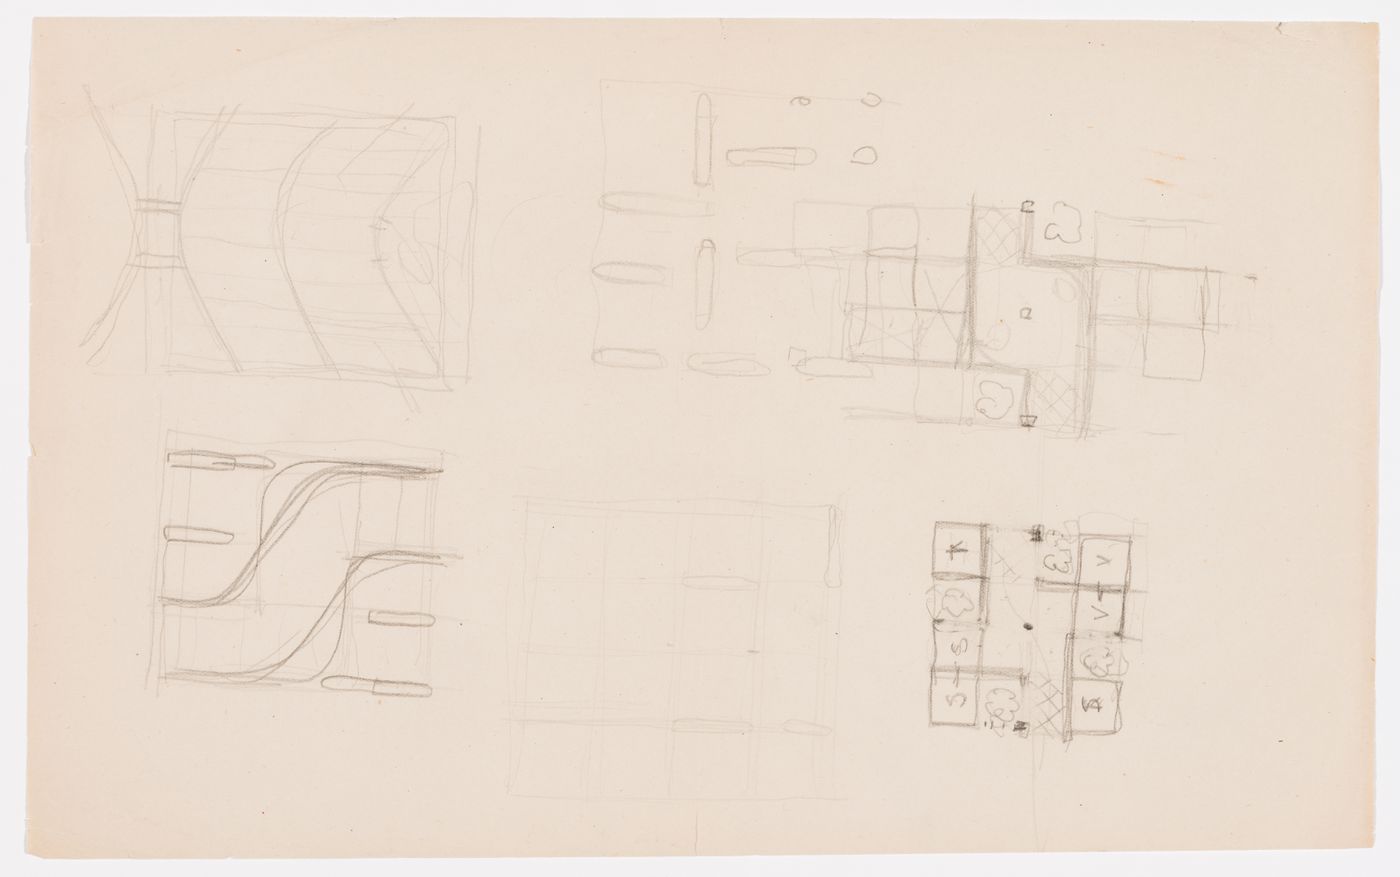 Sketches for dwellings and building possibly in Chandigarh, India